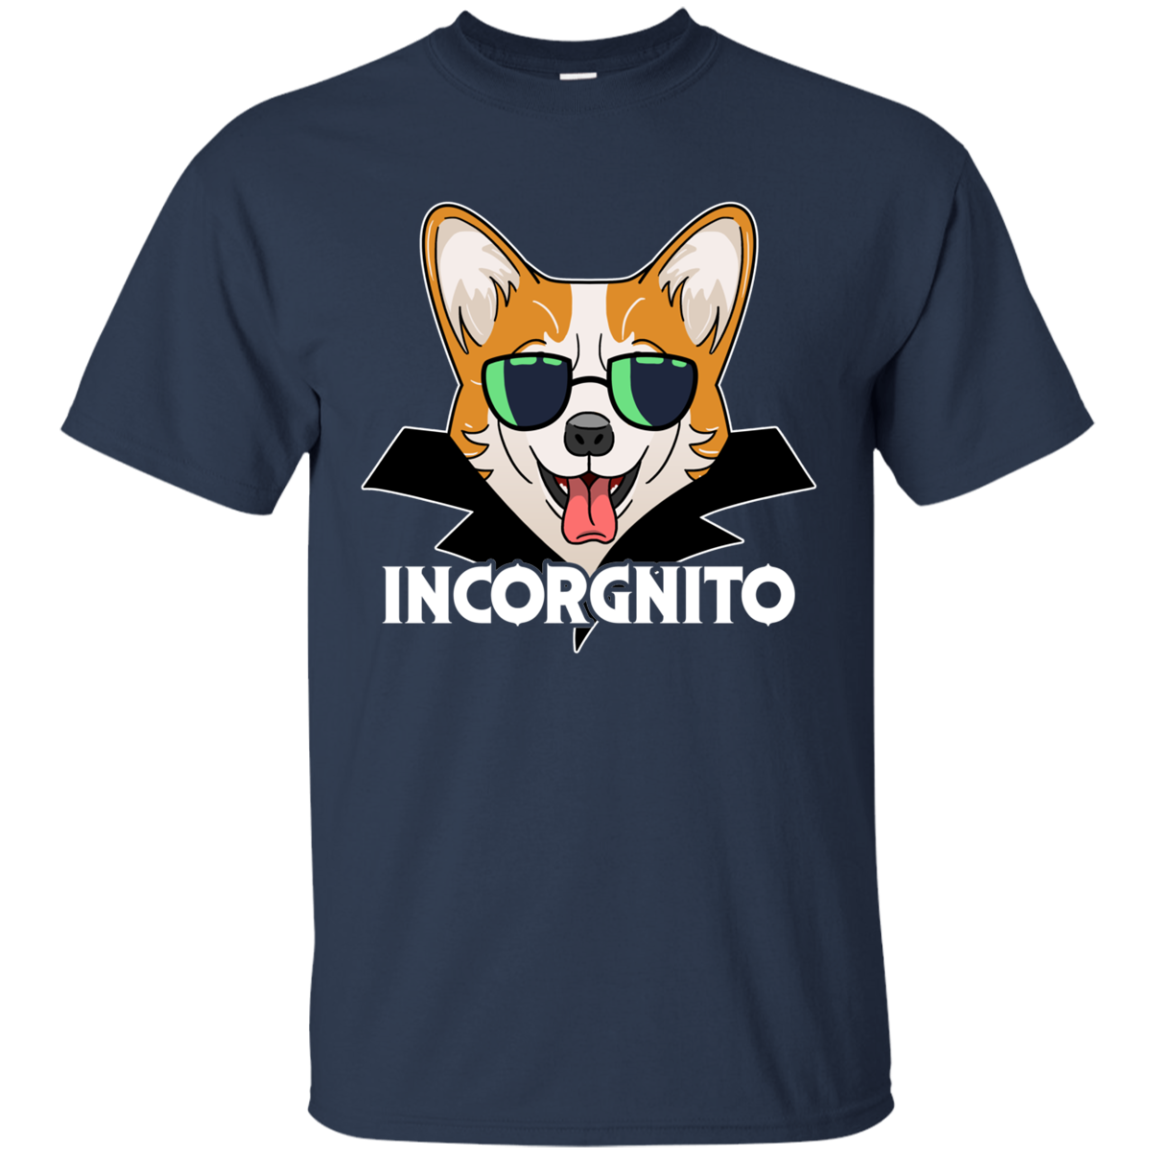 Nice Corgi Black T Shirt - Incorgnito, is cool gift for your friends ...